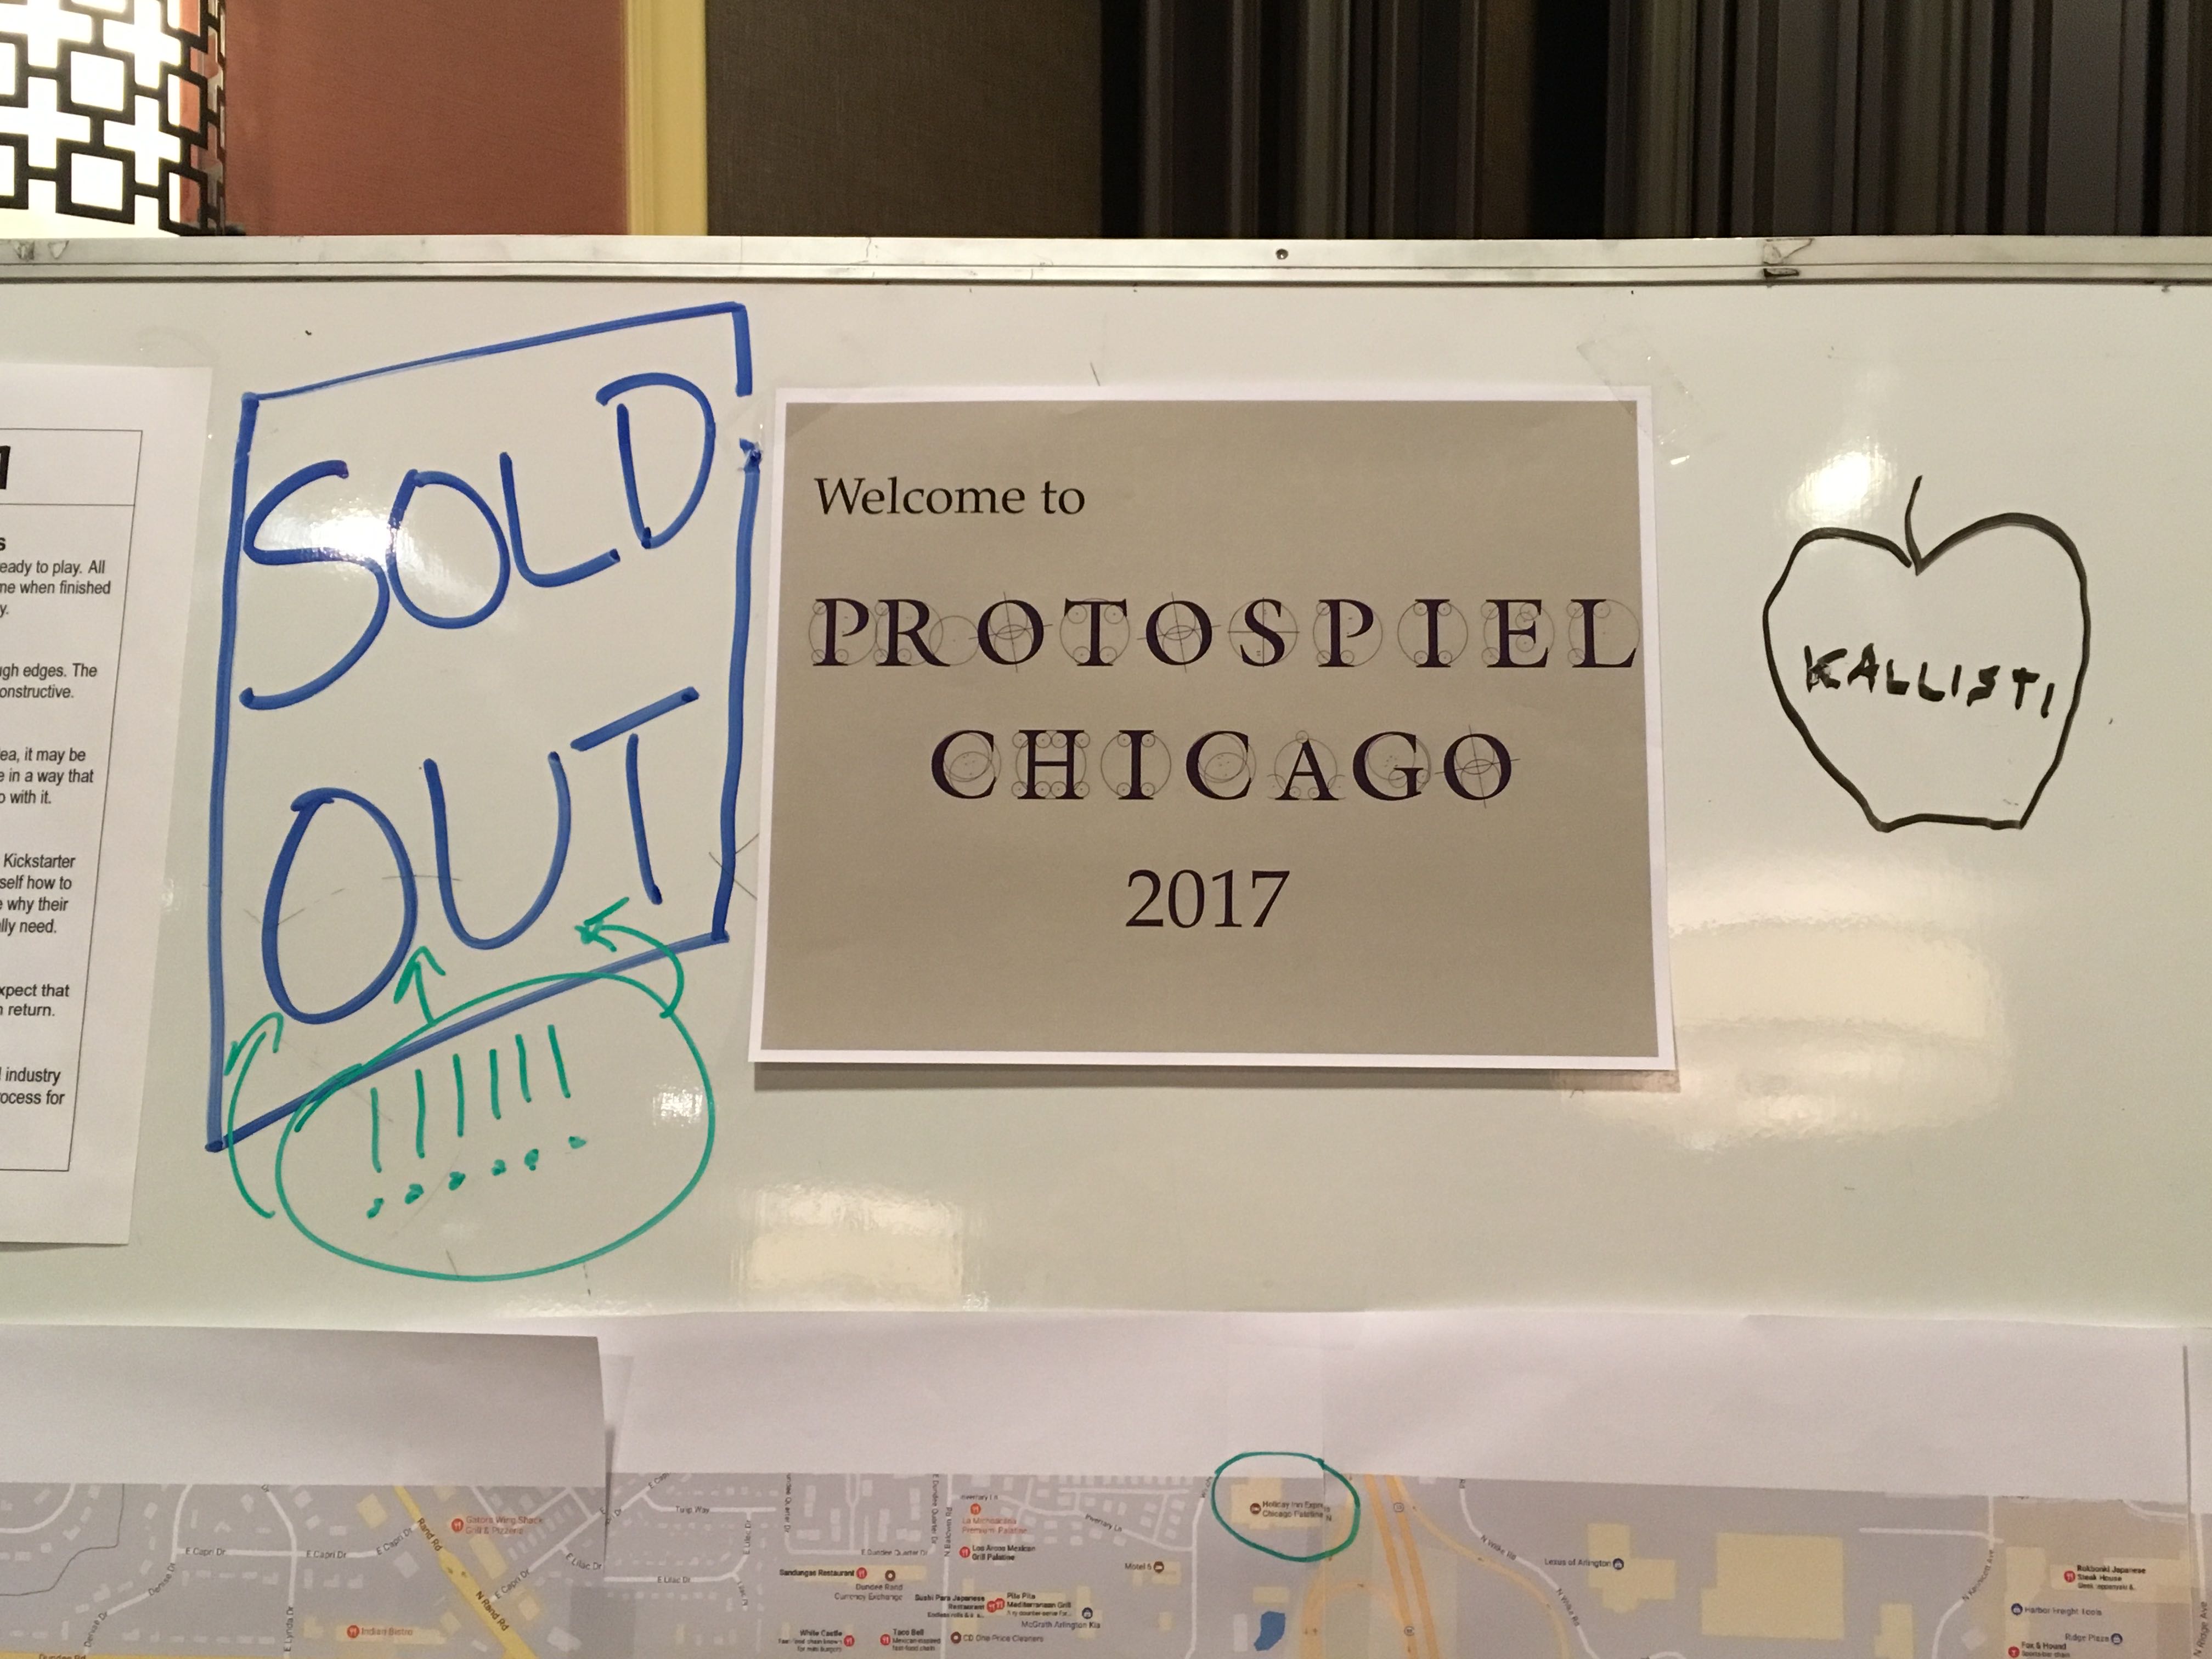 PS-17 White board with Sold Out sign.